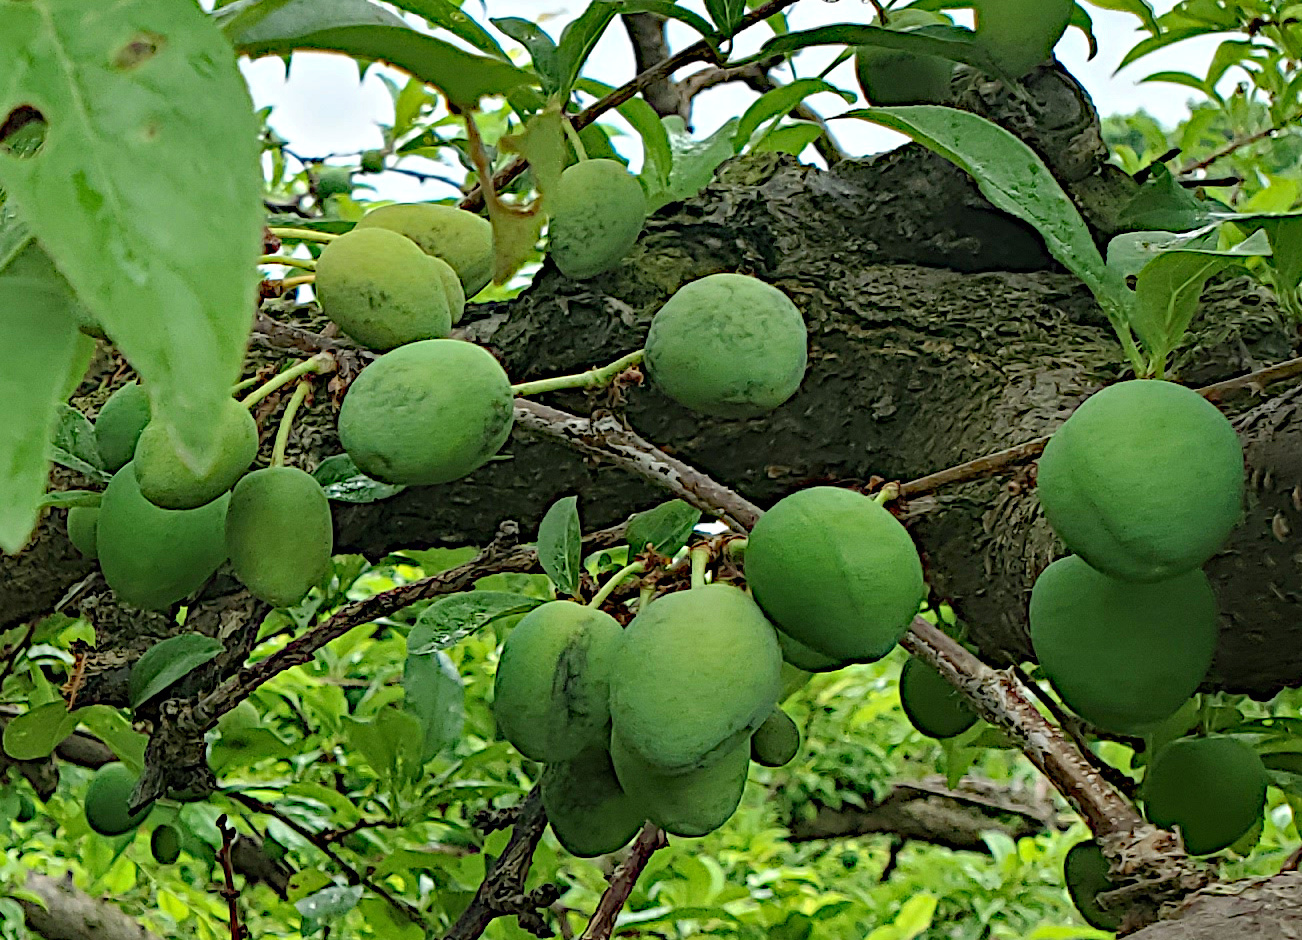 Japanese plums